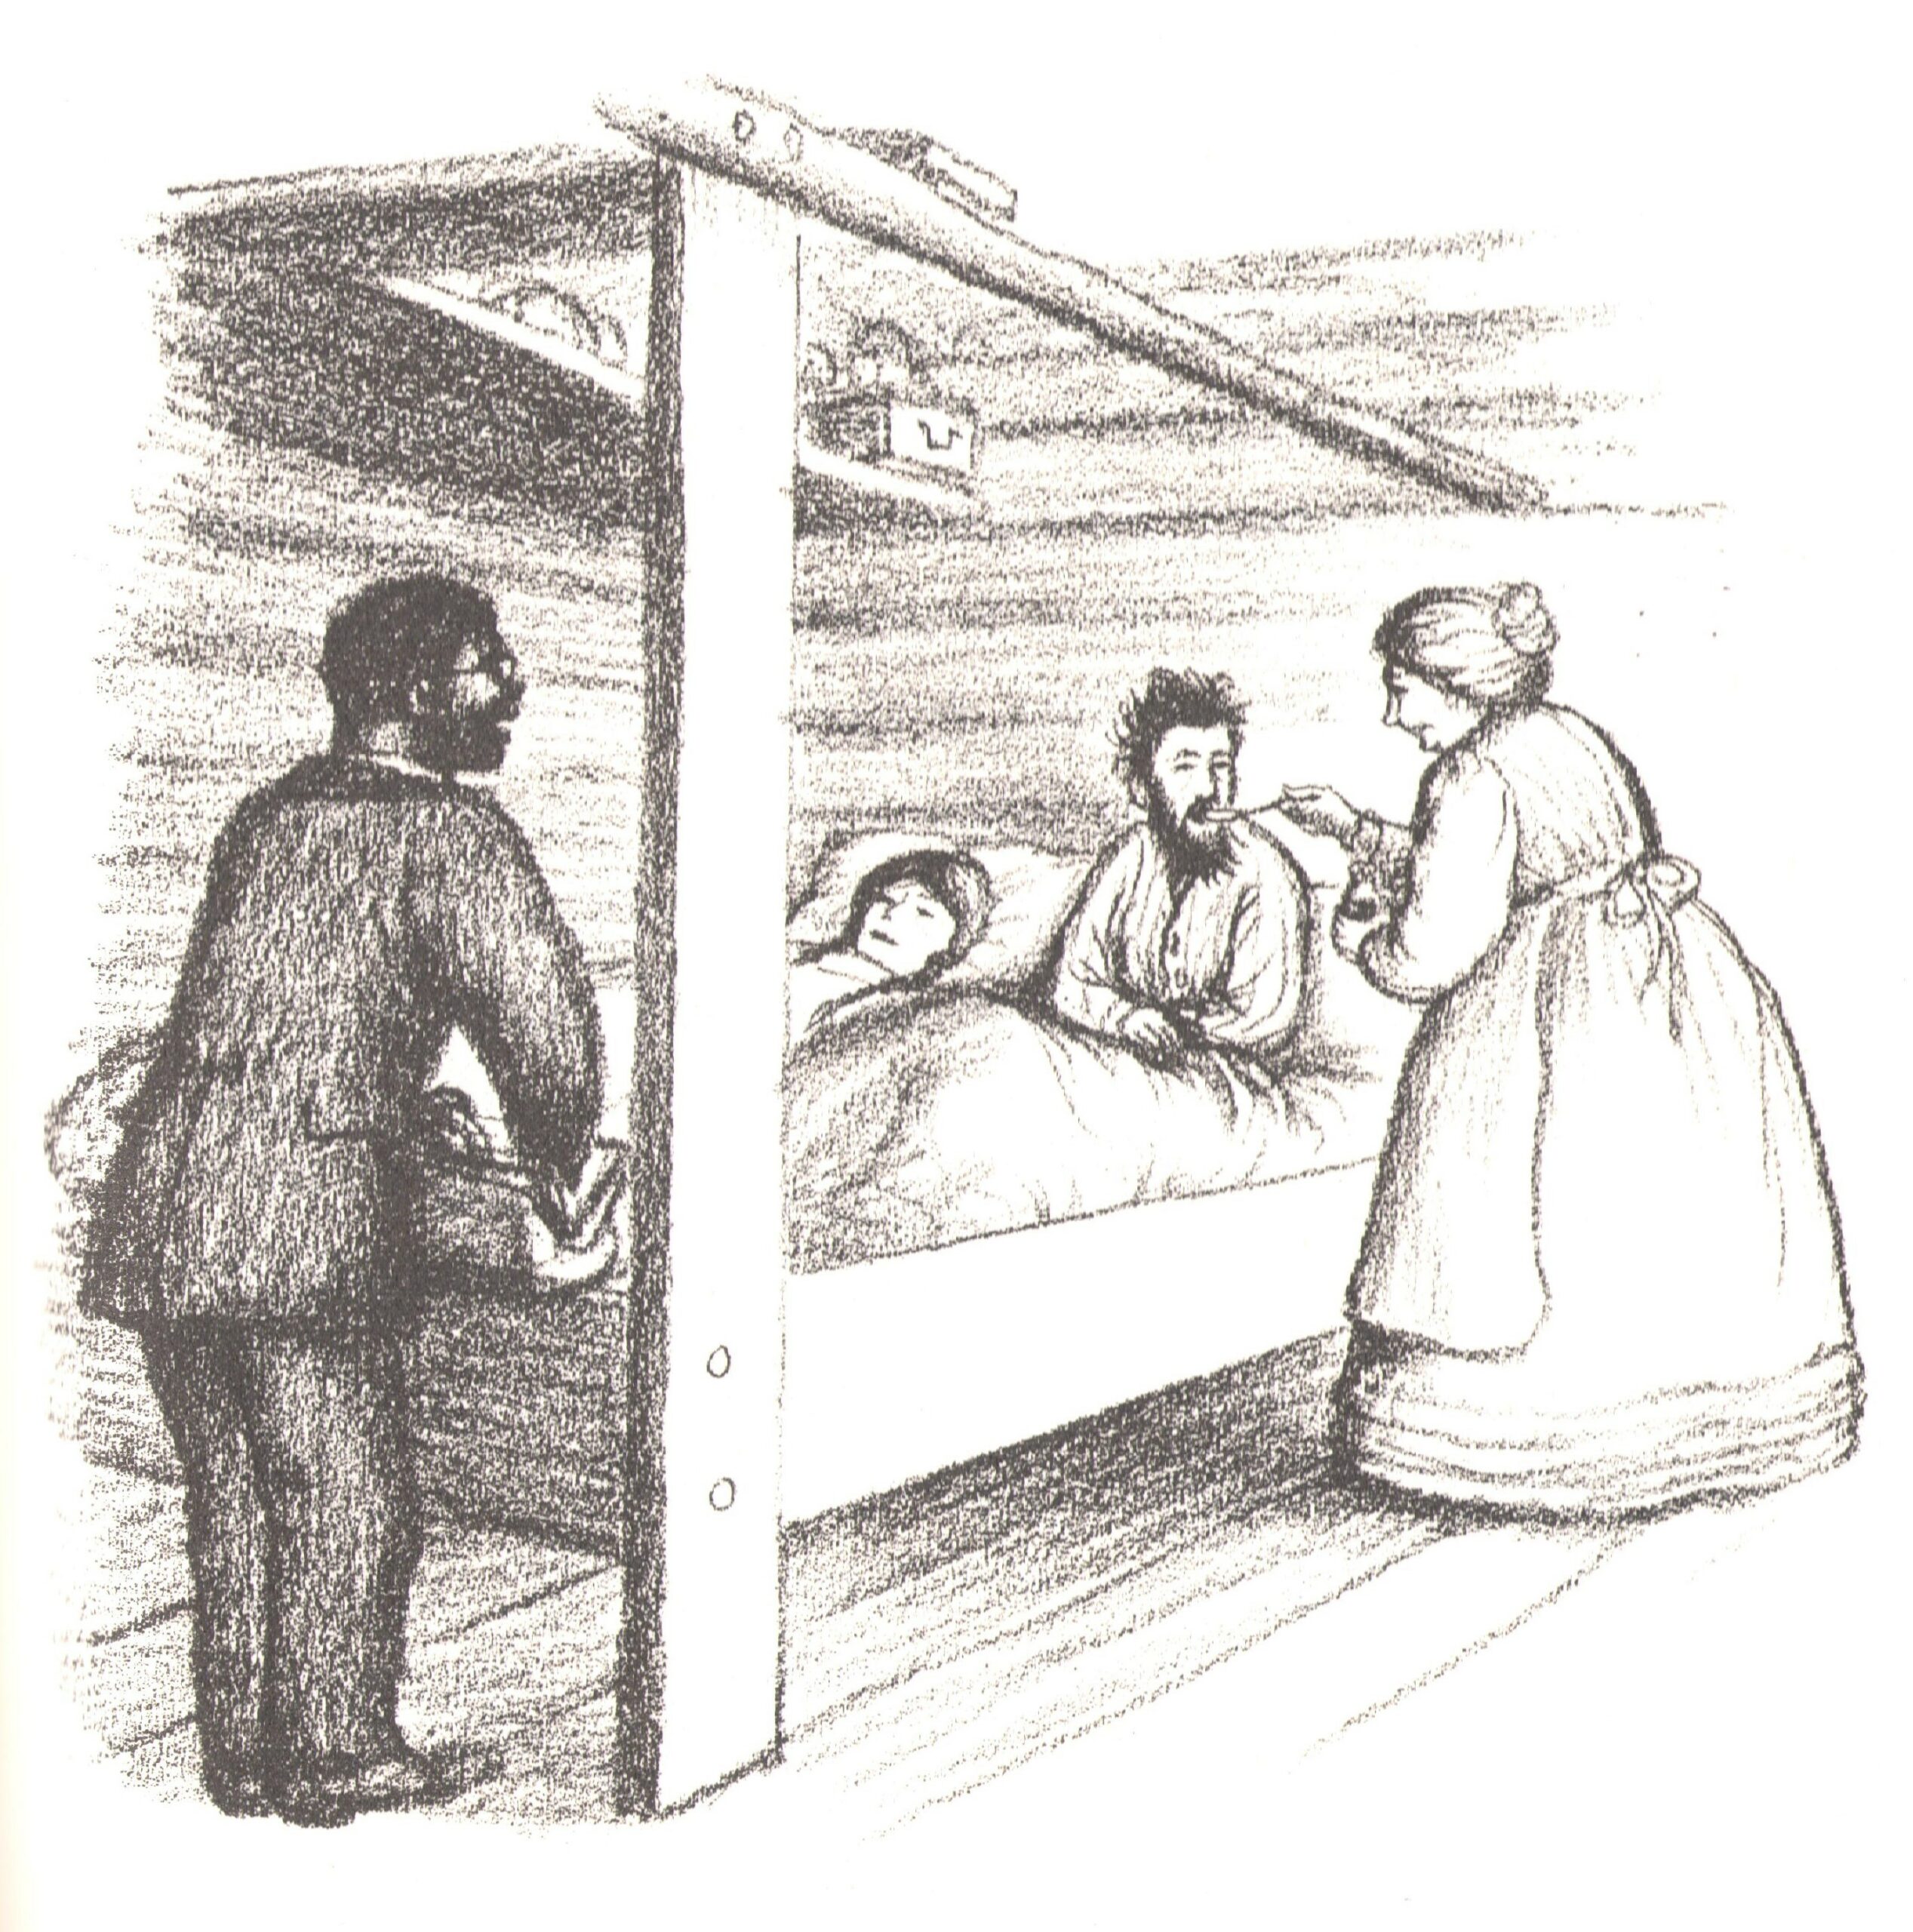 Dr. Tan and Mrs. Scott tend to the Ingalls family in Chapter 15 of Little House on the Prairie. Illustration by Garth Williams.